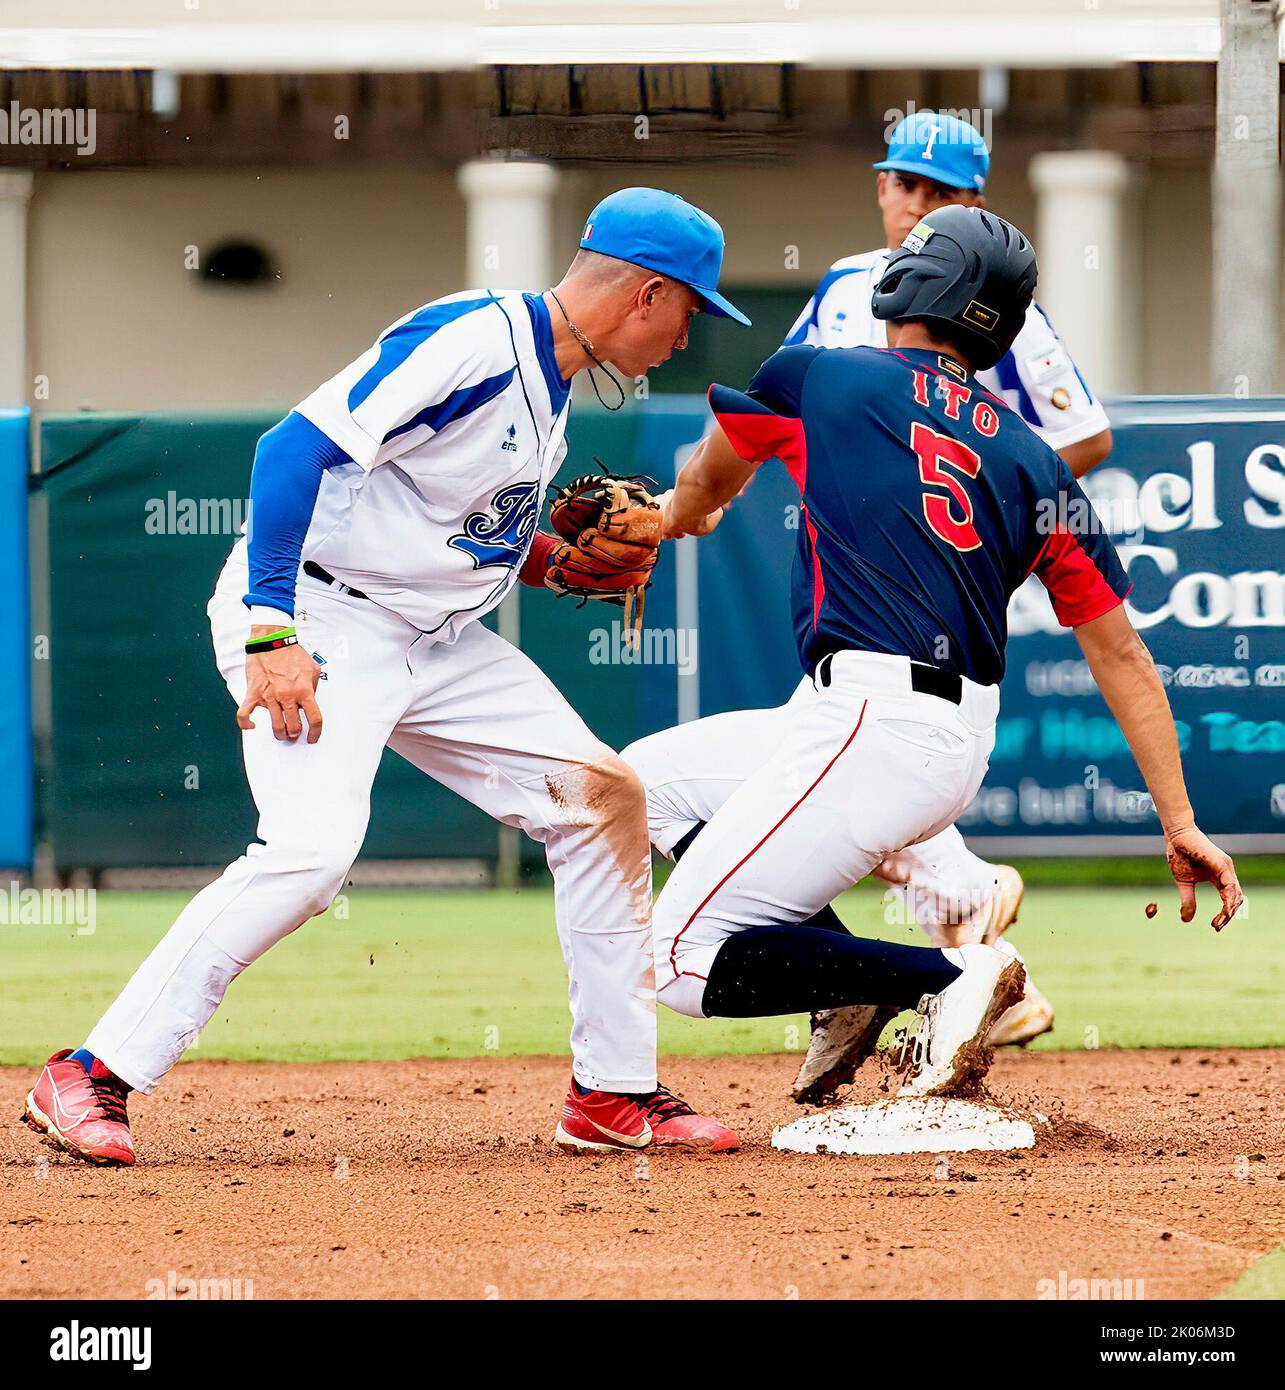 September 9, 2022, Sarasota, Florida, USA: JapanÃs KAITI ITO (5) is takes second base in his teams 6-0 win over Italy in U-18 Baseball at Ed Smith Stadium, Friday. (Credit Image: © Jerry Beard/ZUMA Press Wire) Stock Photo